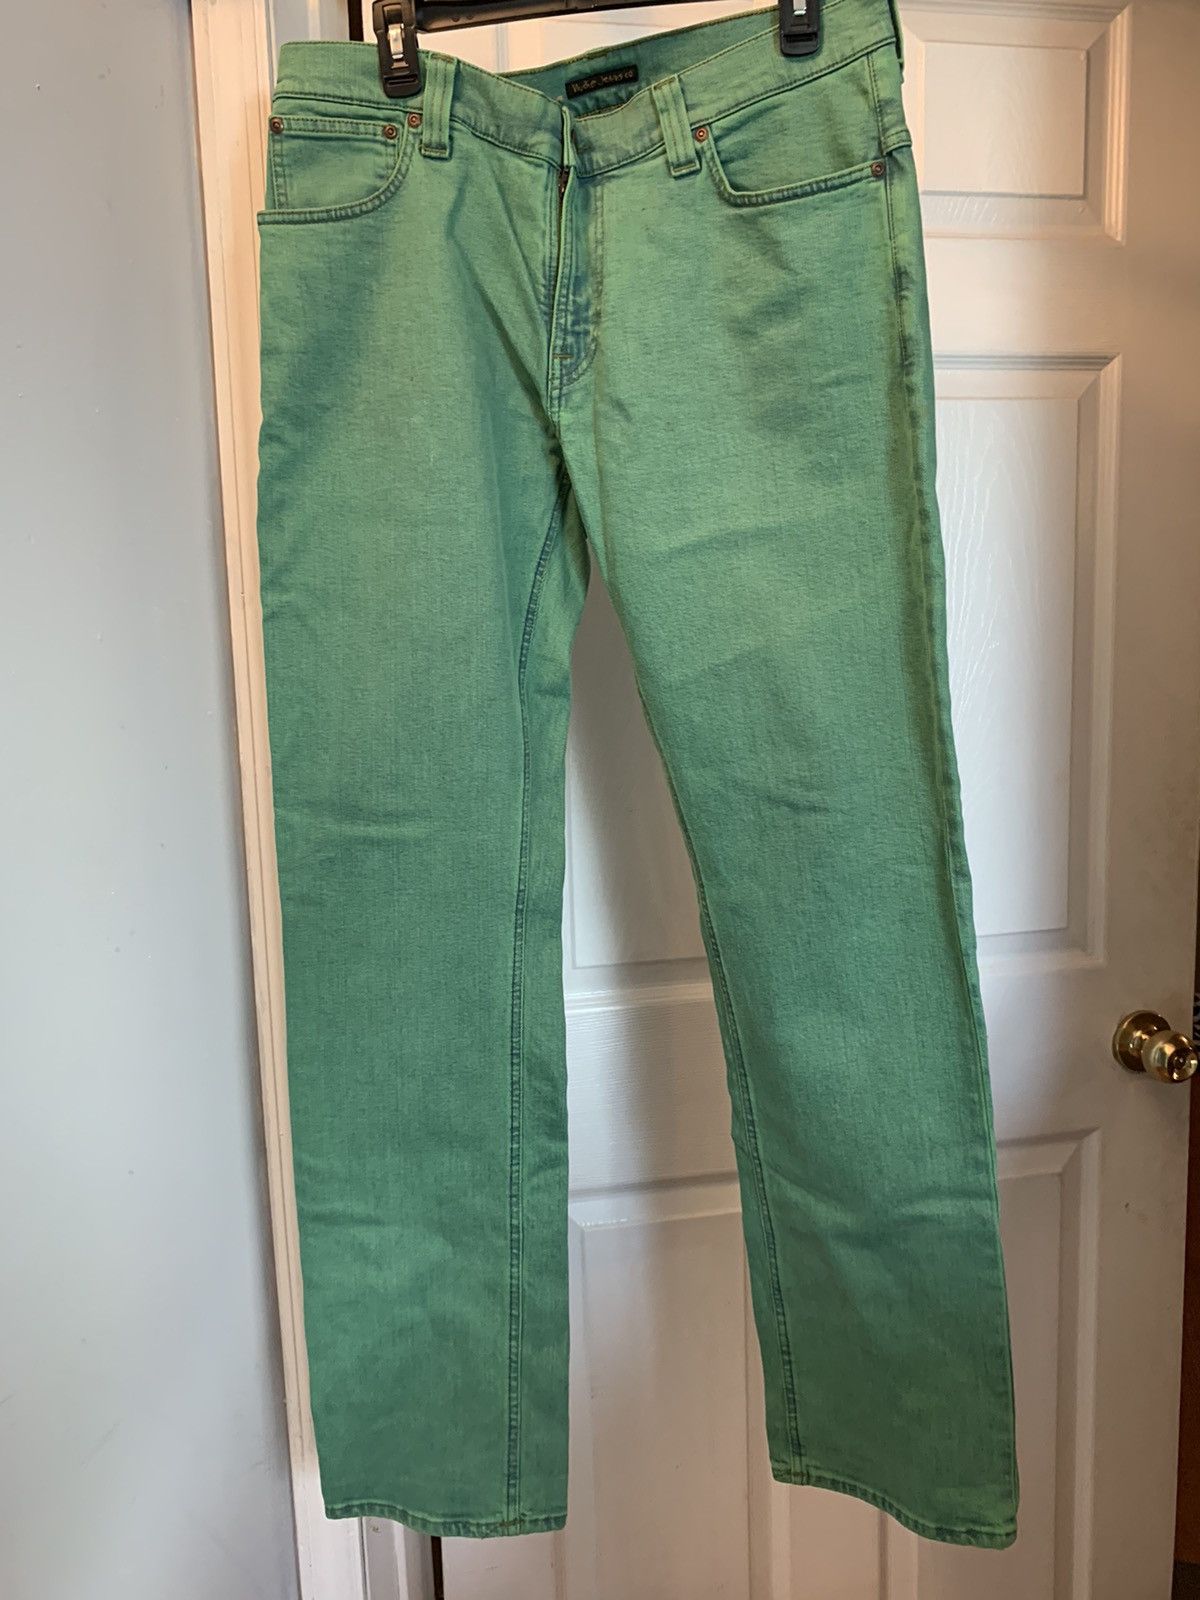 Nudie Jeans Nudie Jeans Green Denim Straight Jeans Size US 36 / EU 52 - 1 Preview